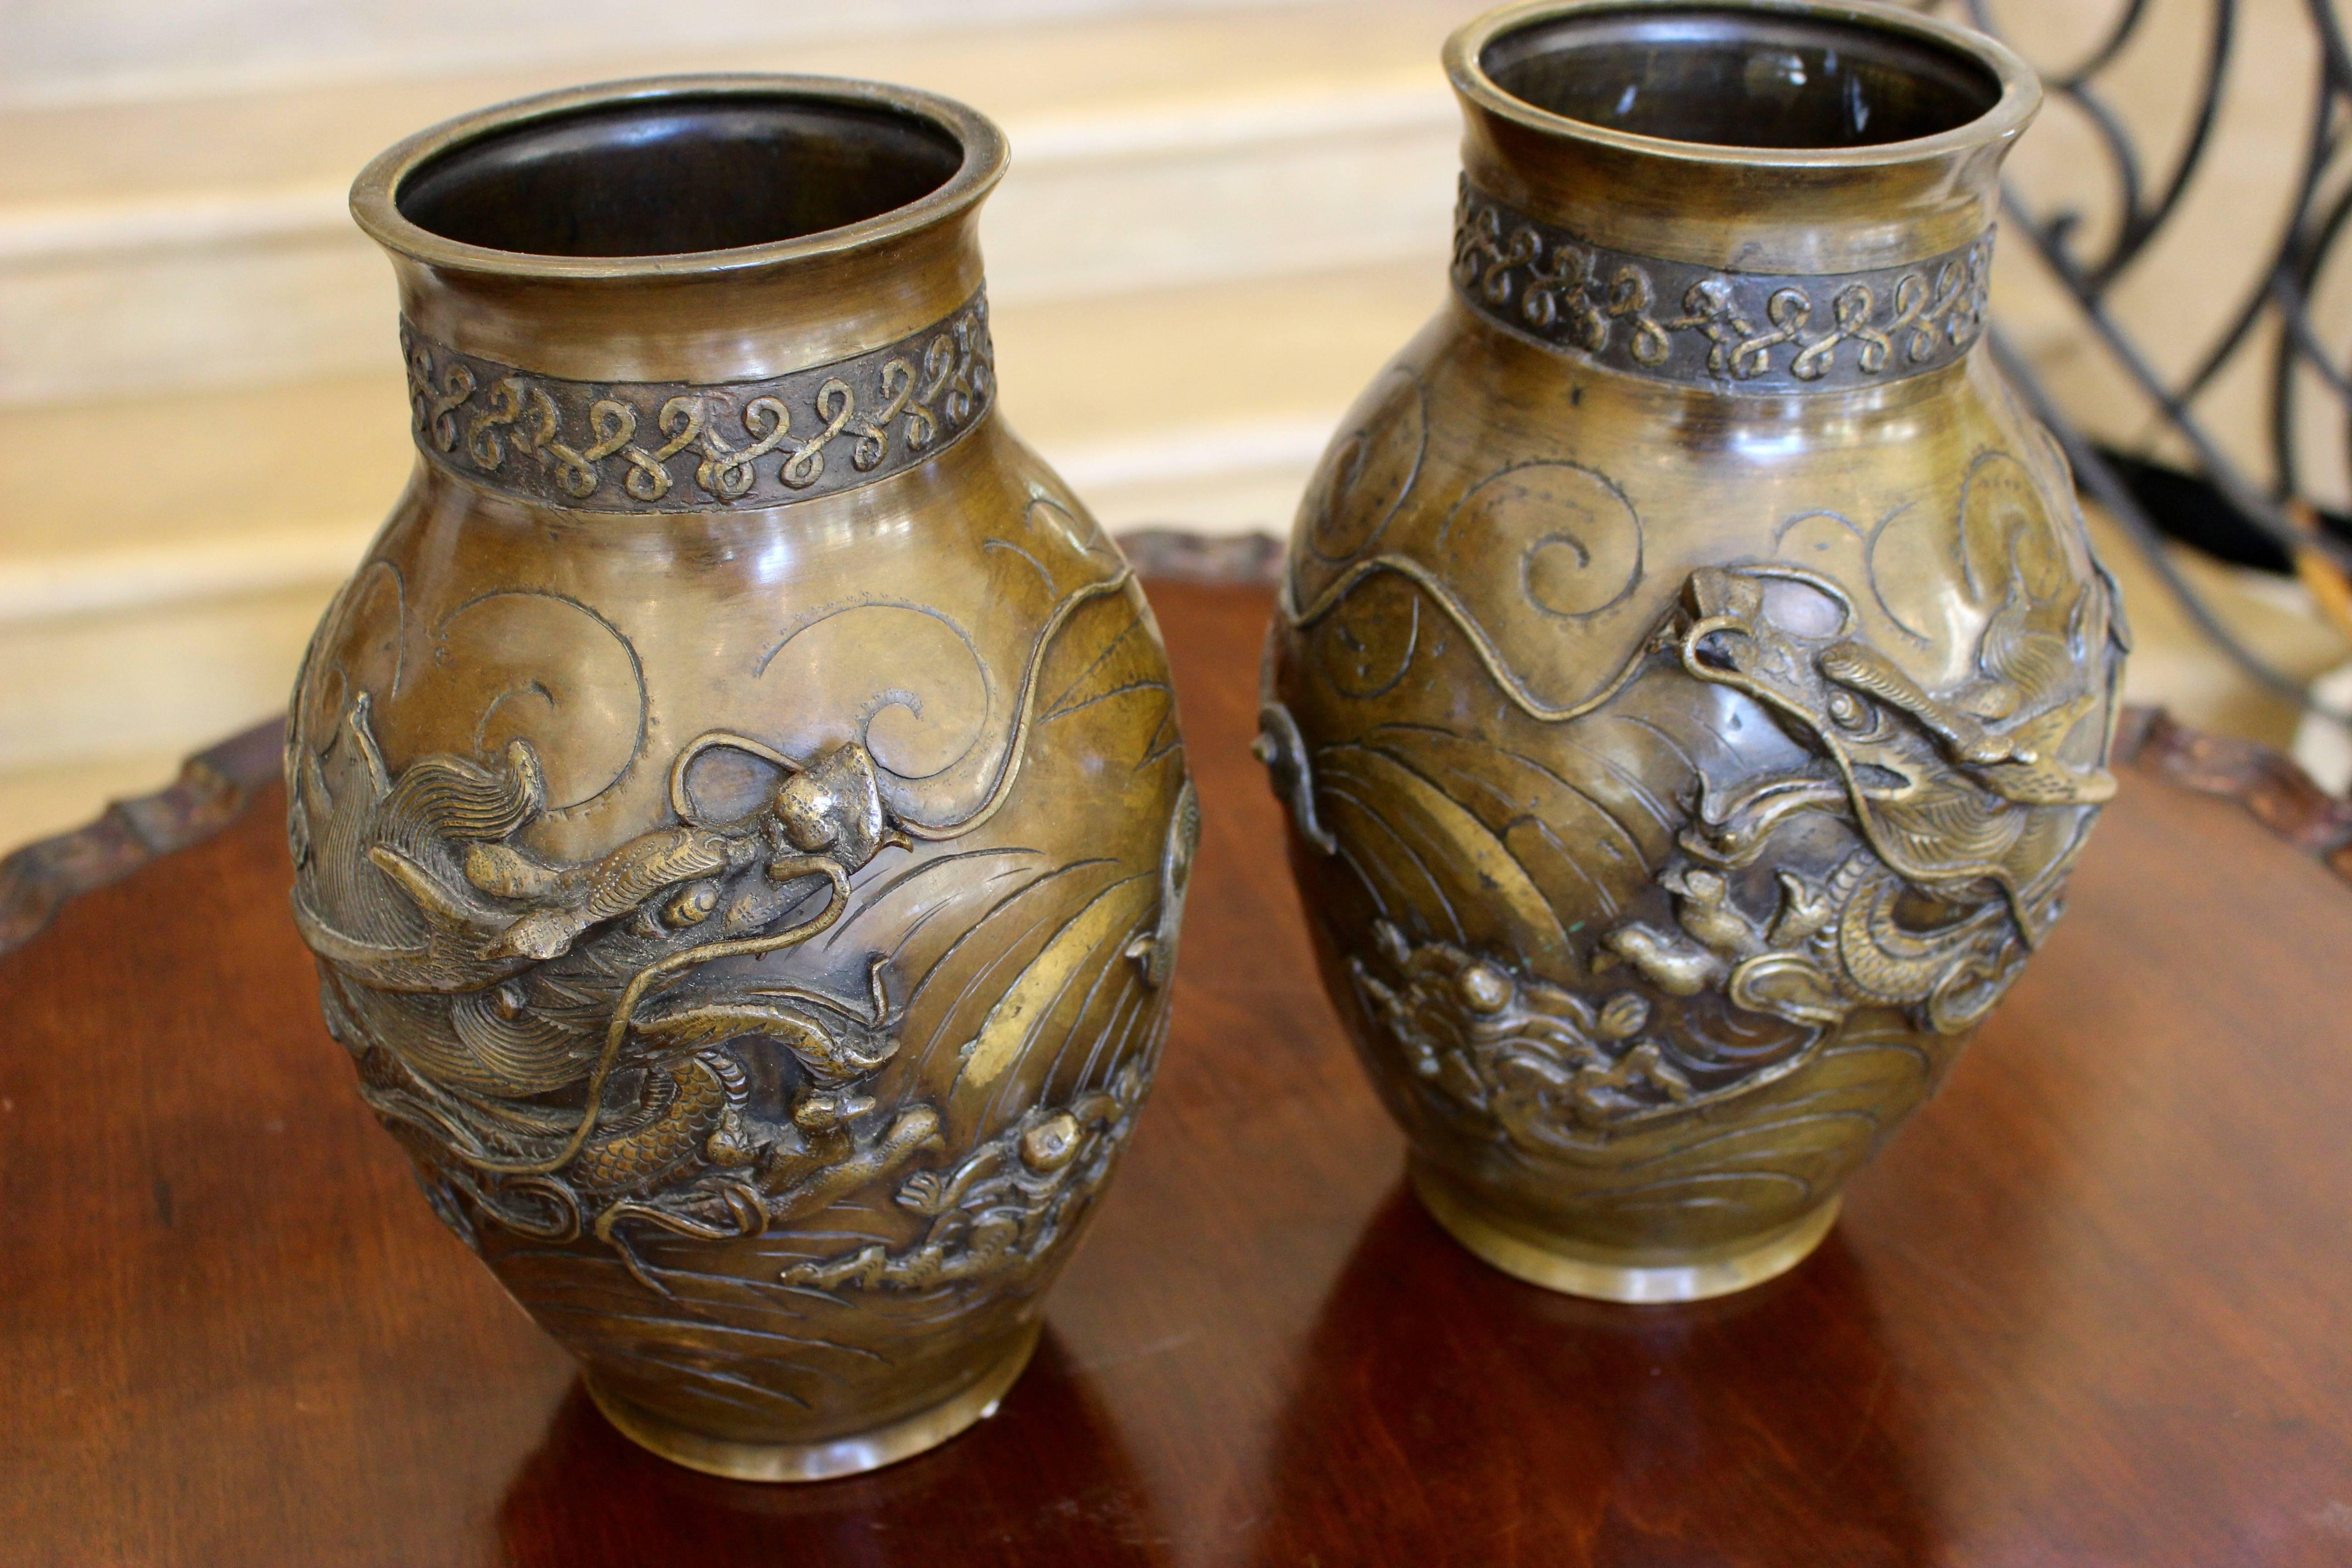 A pair of matching Japanese bronze vases from the 20th century finely cast with dragon figures. A high relief cast decoration of a three-clawed dragon is wrapped around the body of each vase, swimming in an aquatic environment symbolized by curved